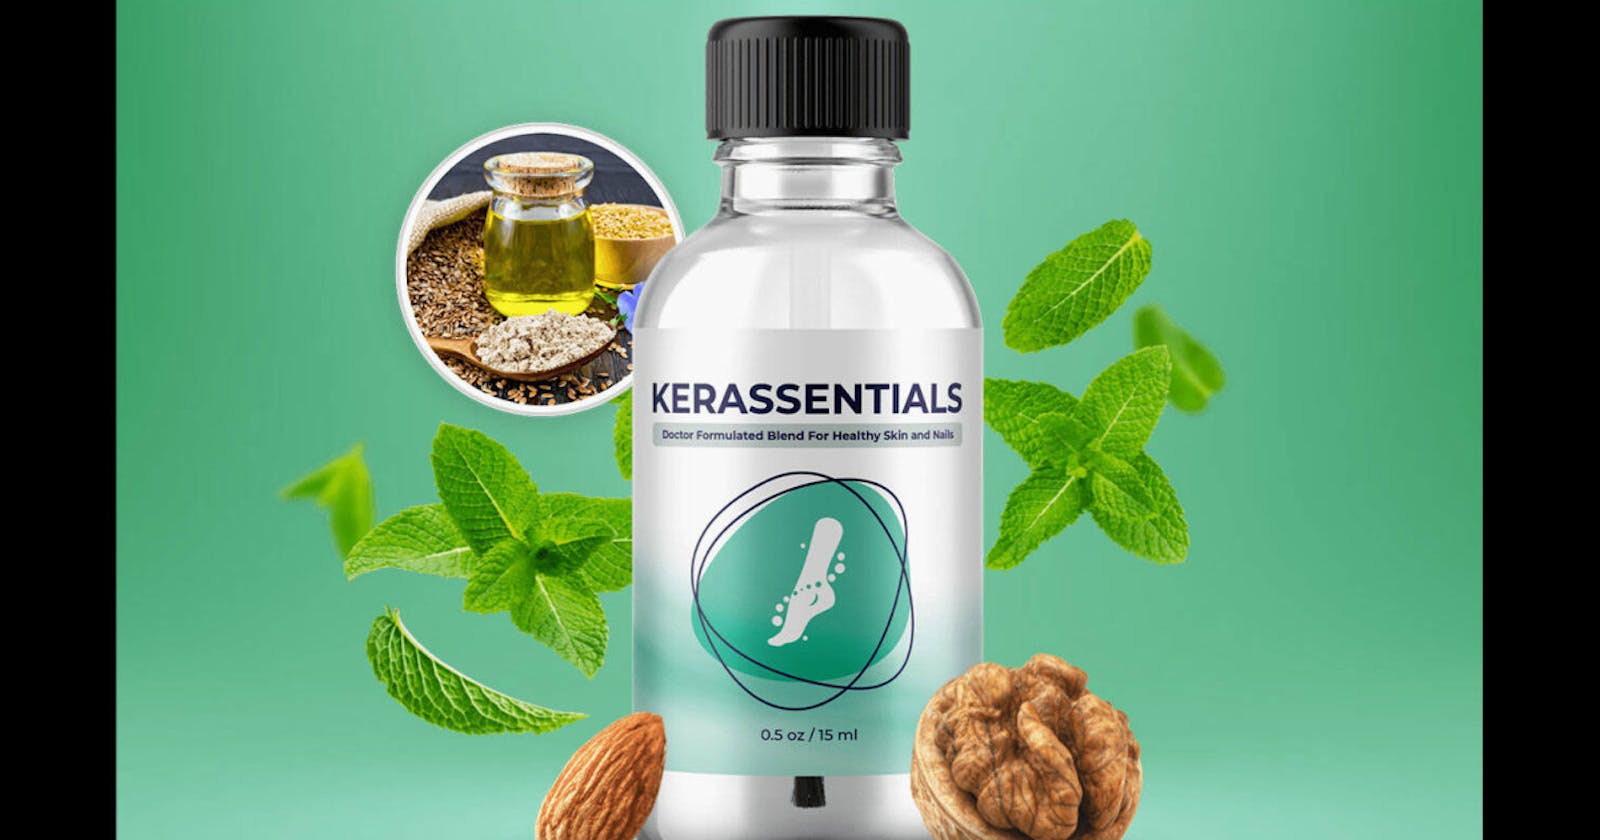 Kerassentials - Nail Fungus Solution, Uses, Results, Scam Or Legit?